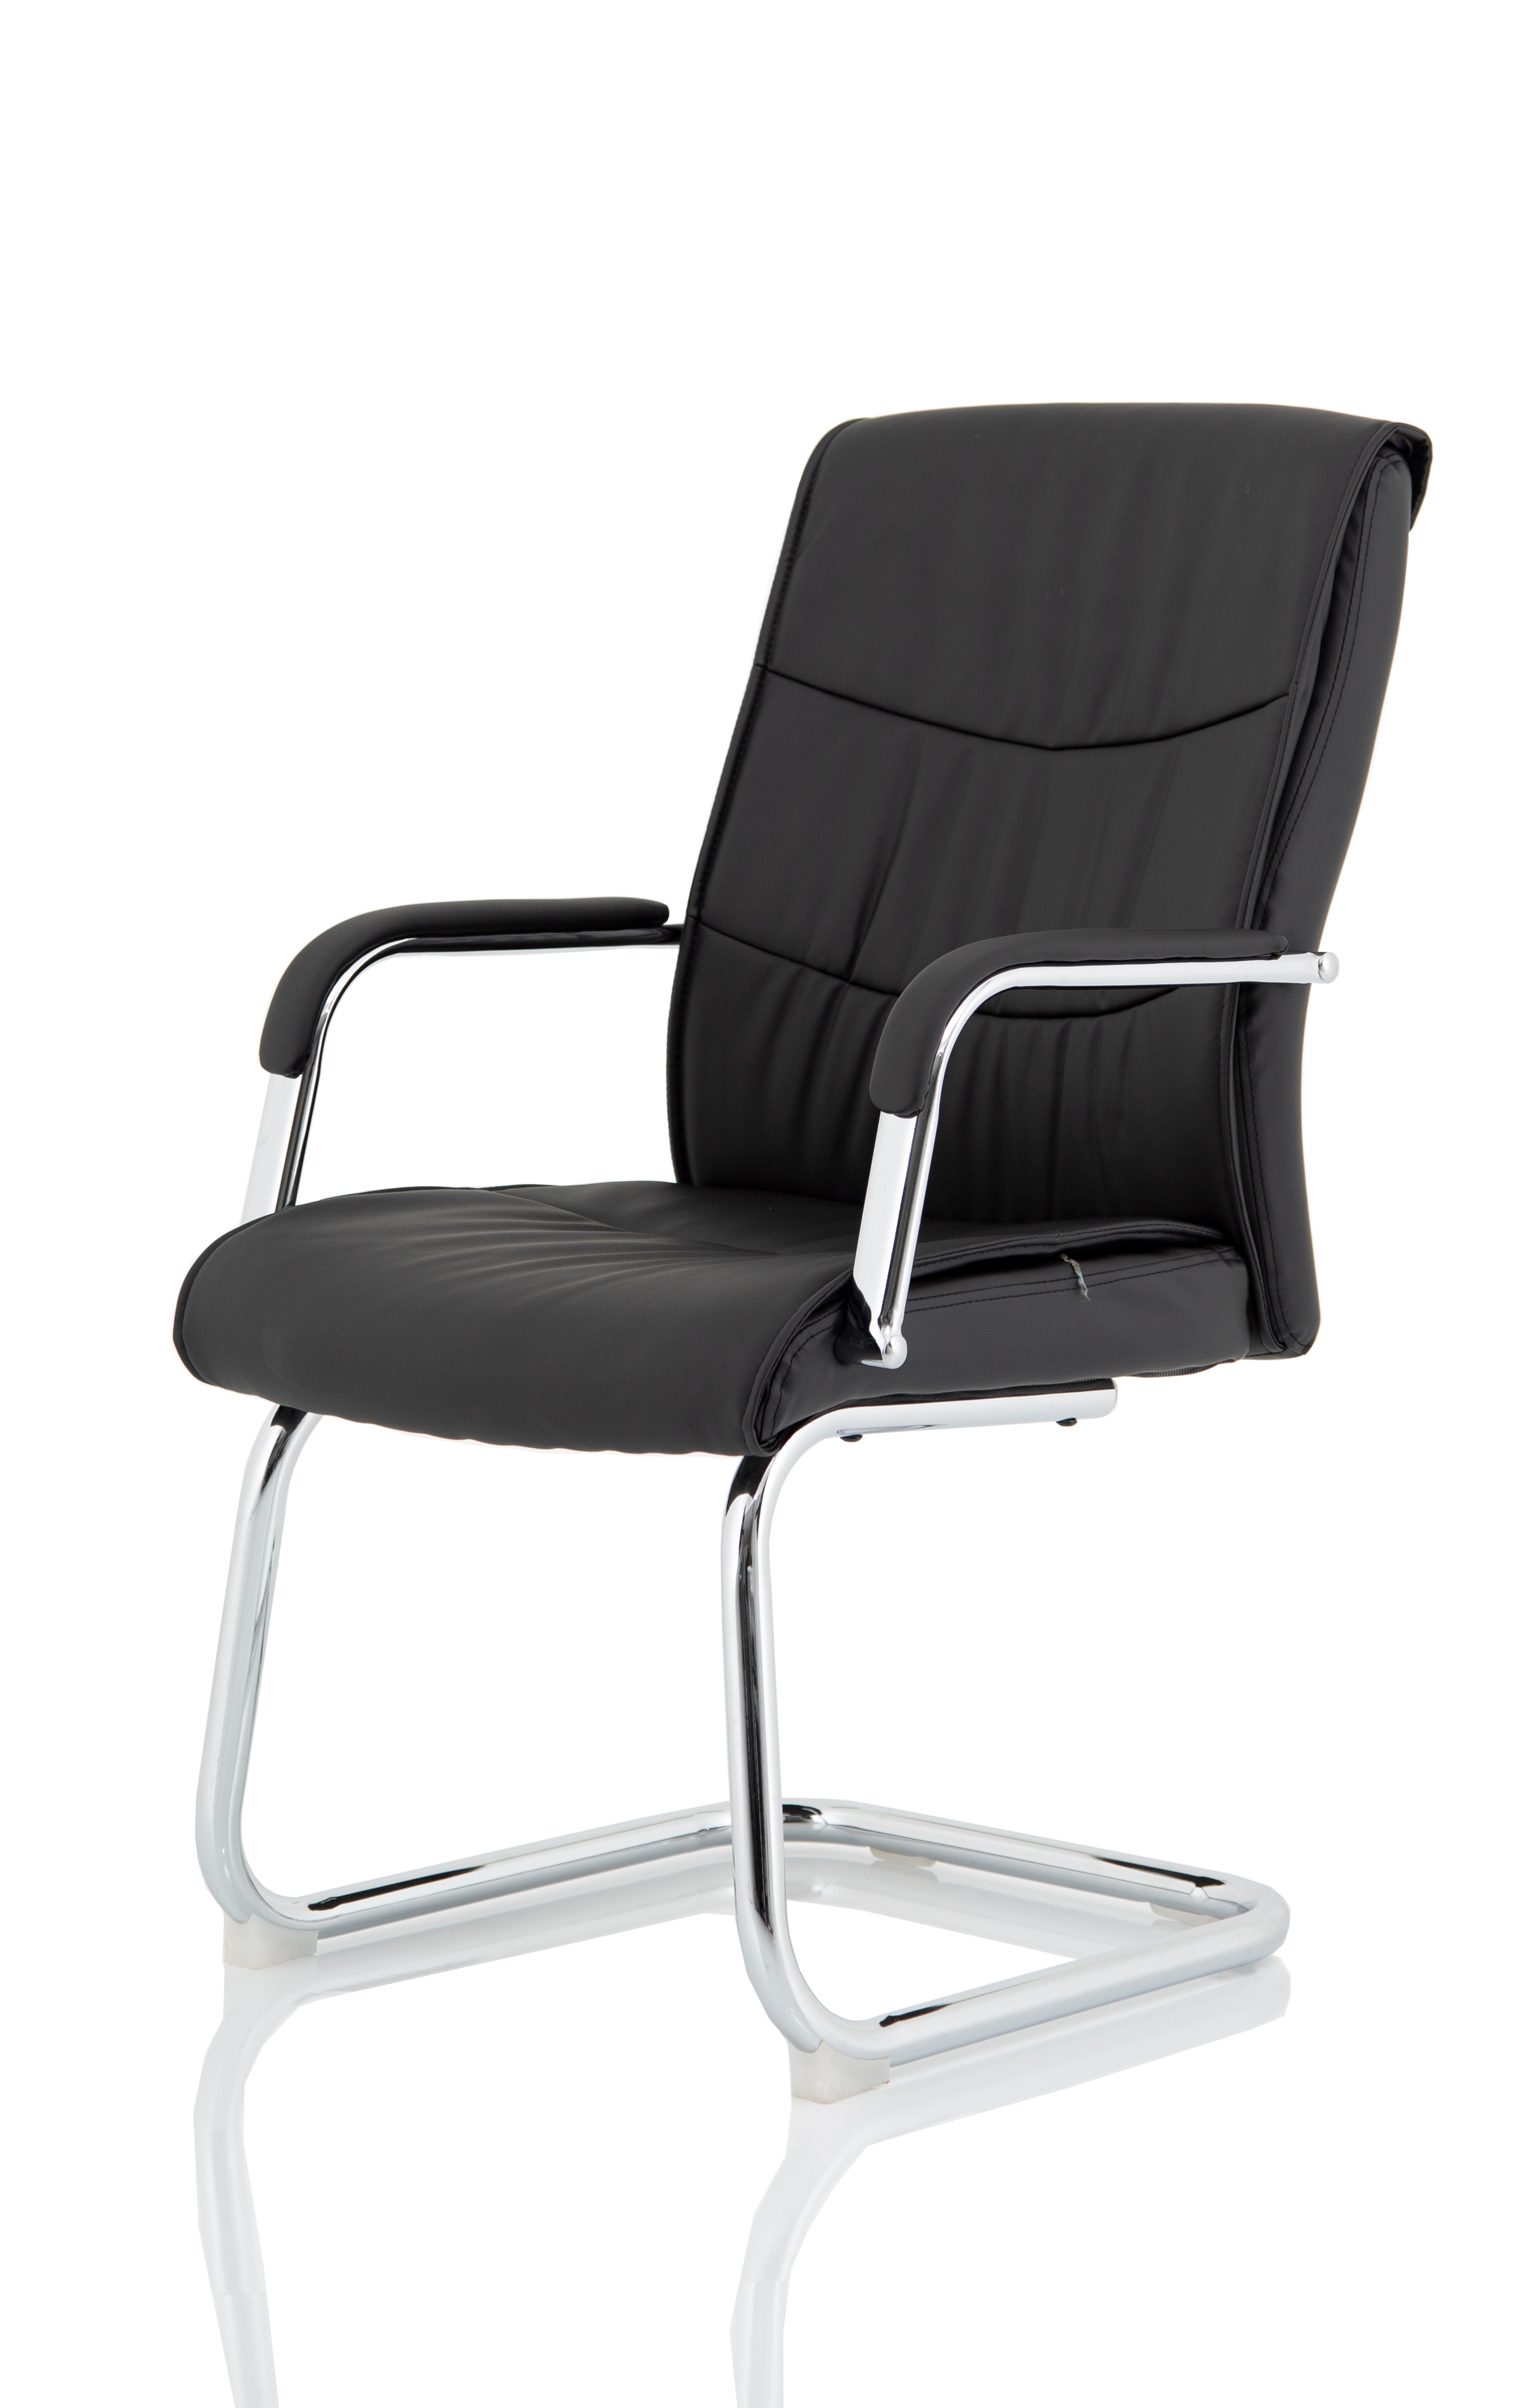 Carter Luxury Faux Leather Cantilever Chair With Arms - Black